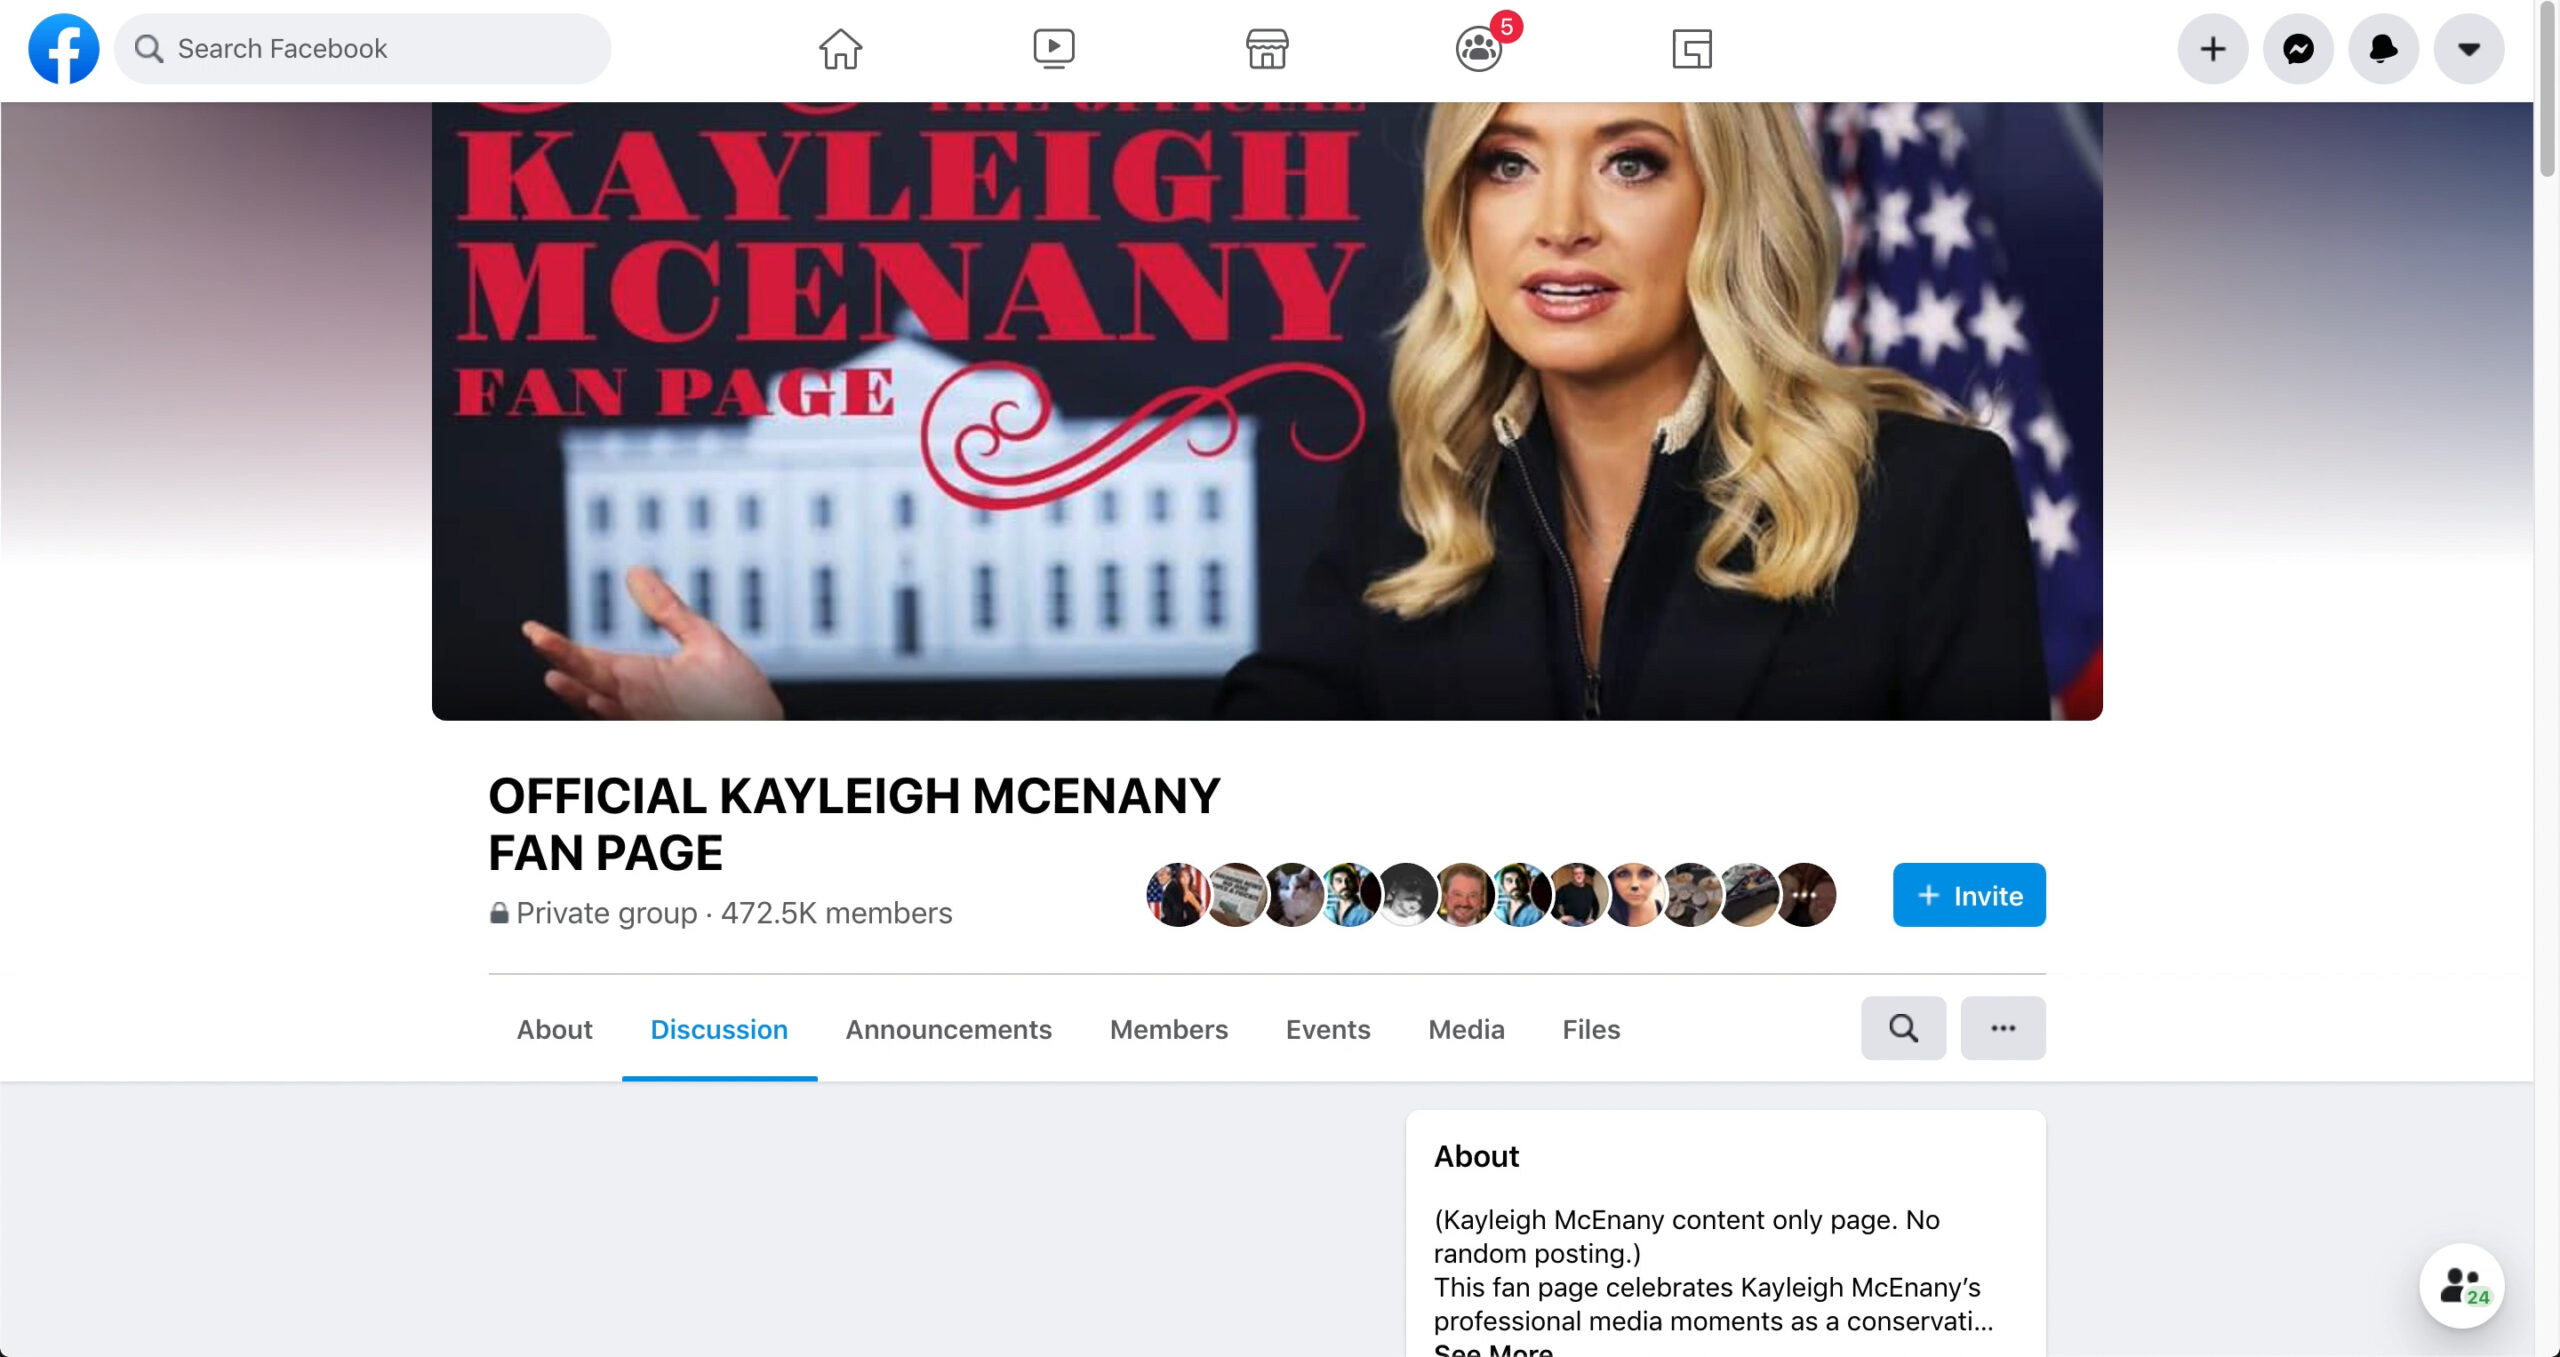 Facebook Shutters Pro-Trump Group Posing as 'Official Kayleigh McEnany Fan Page'